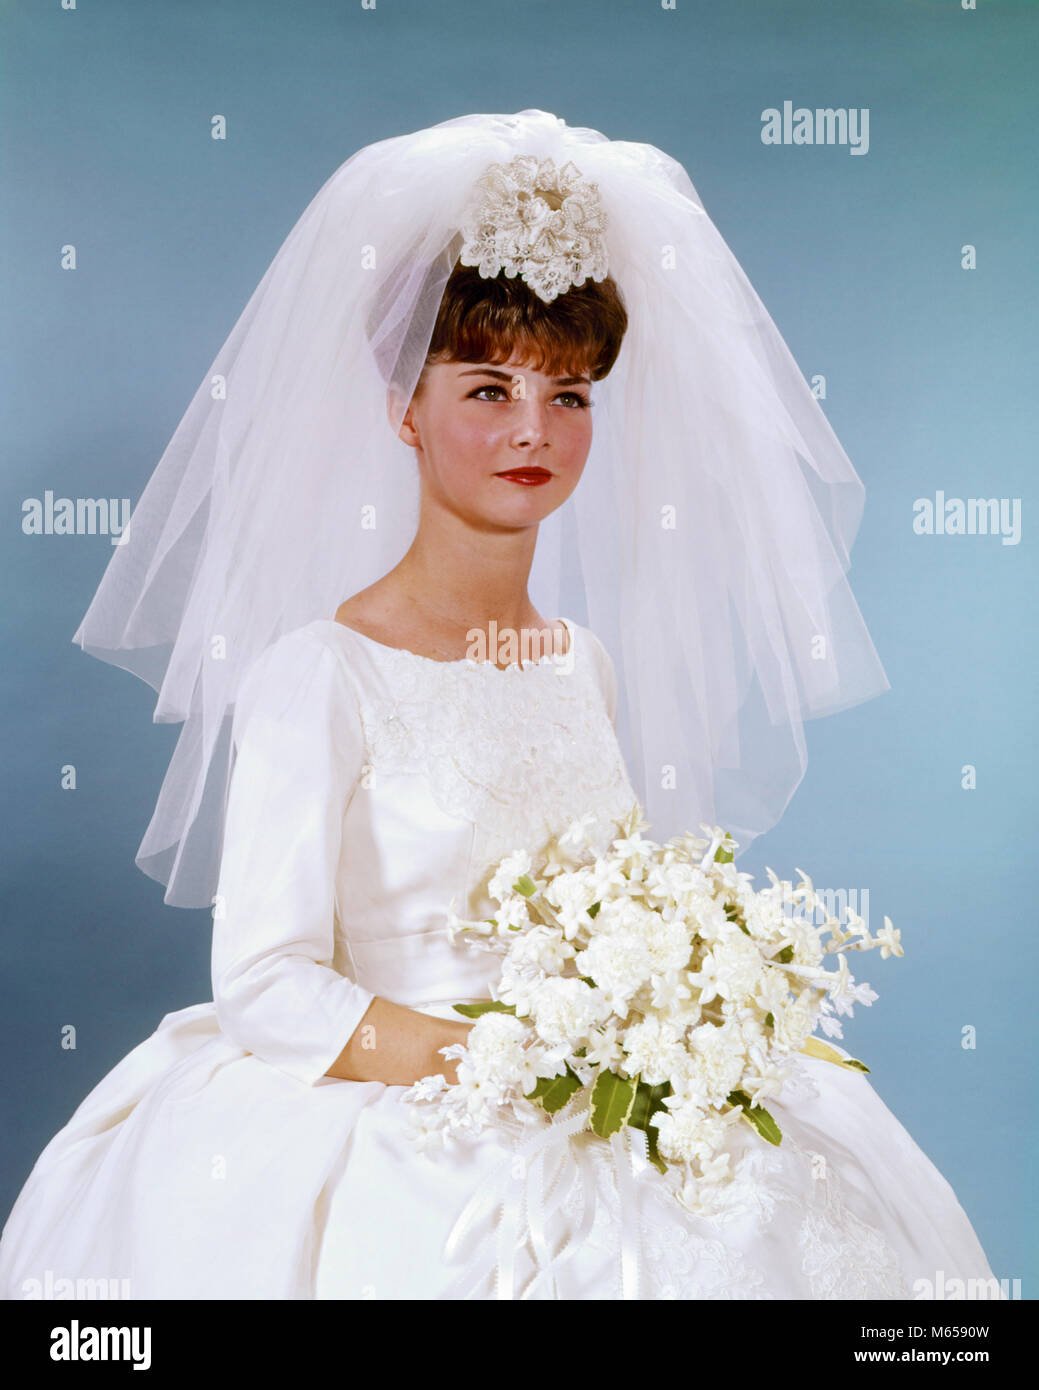 1960s Wedding Dress High Resolution Stock Photography And Images Alamy Dress arwen from the movie lord of the rings: https www alamy com stock photo 1960s portrait woman bride in simple white wedding gown holding white 175908457 html